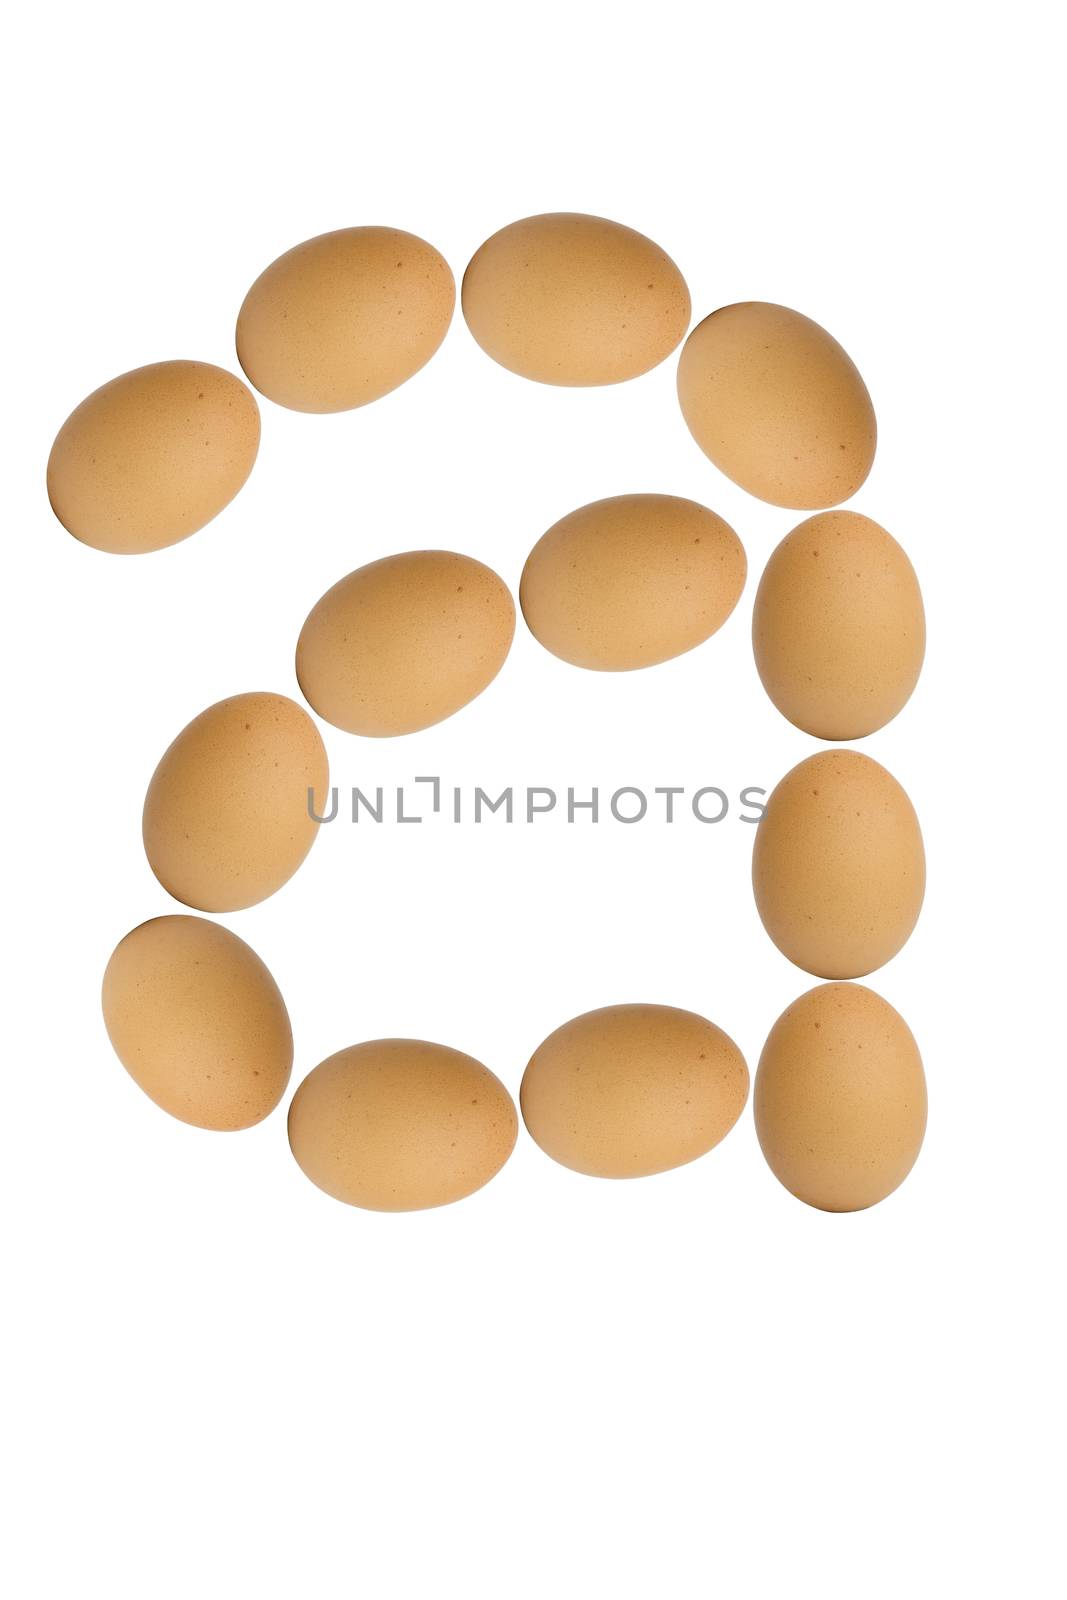 Alphabets  A to Z from brown eggs alphabet isolated on white background, a